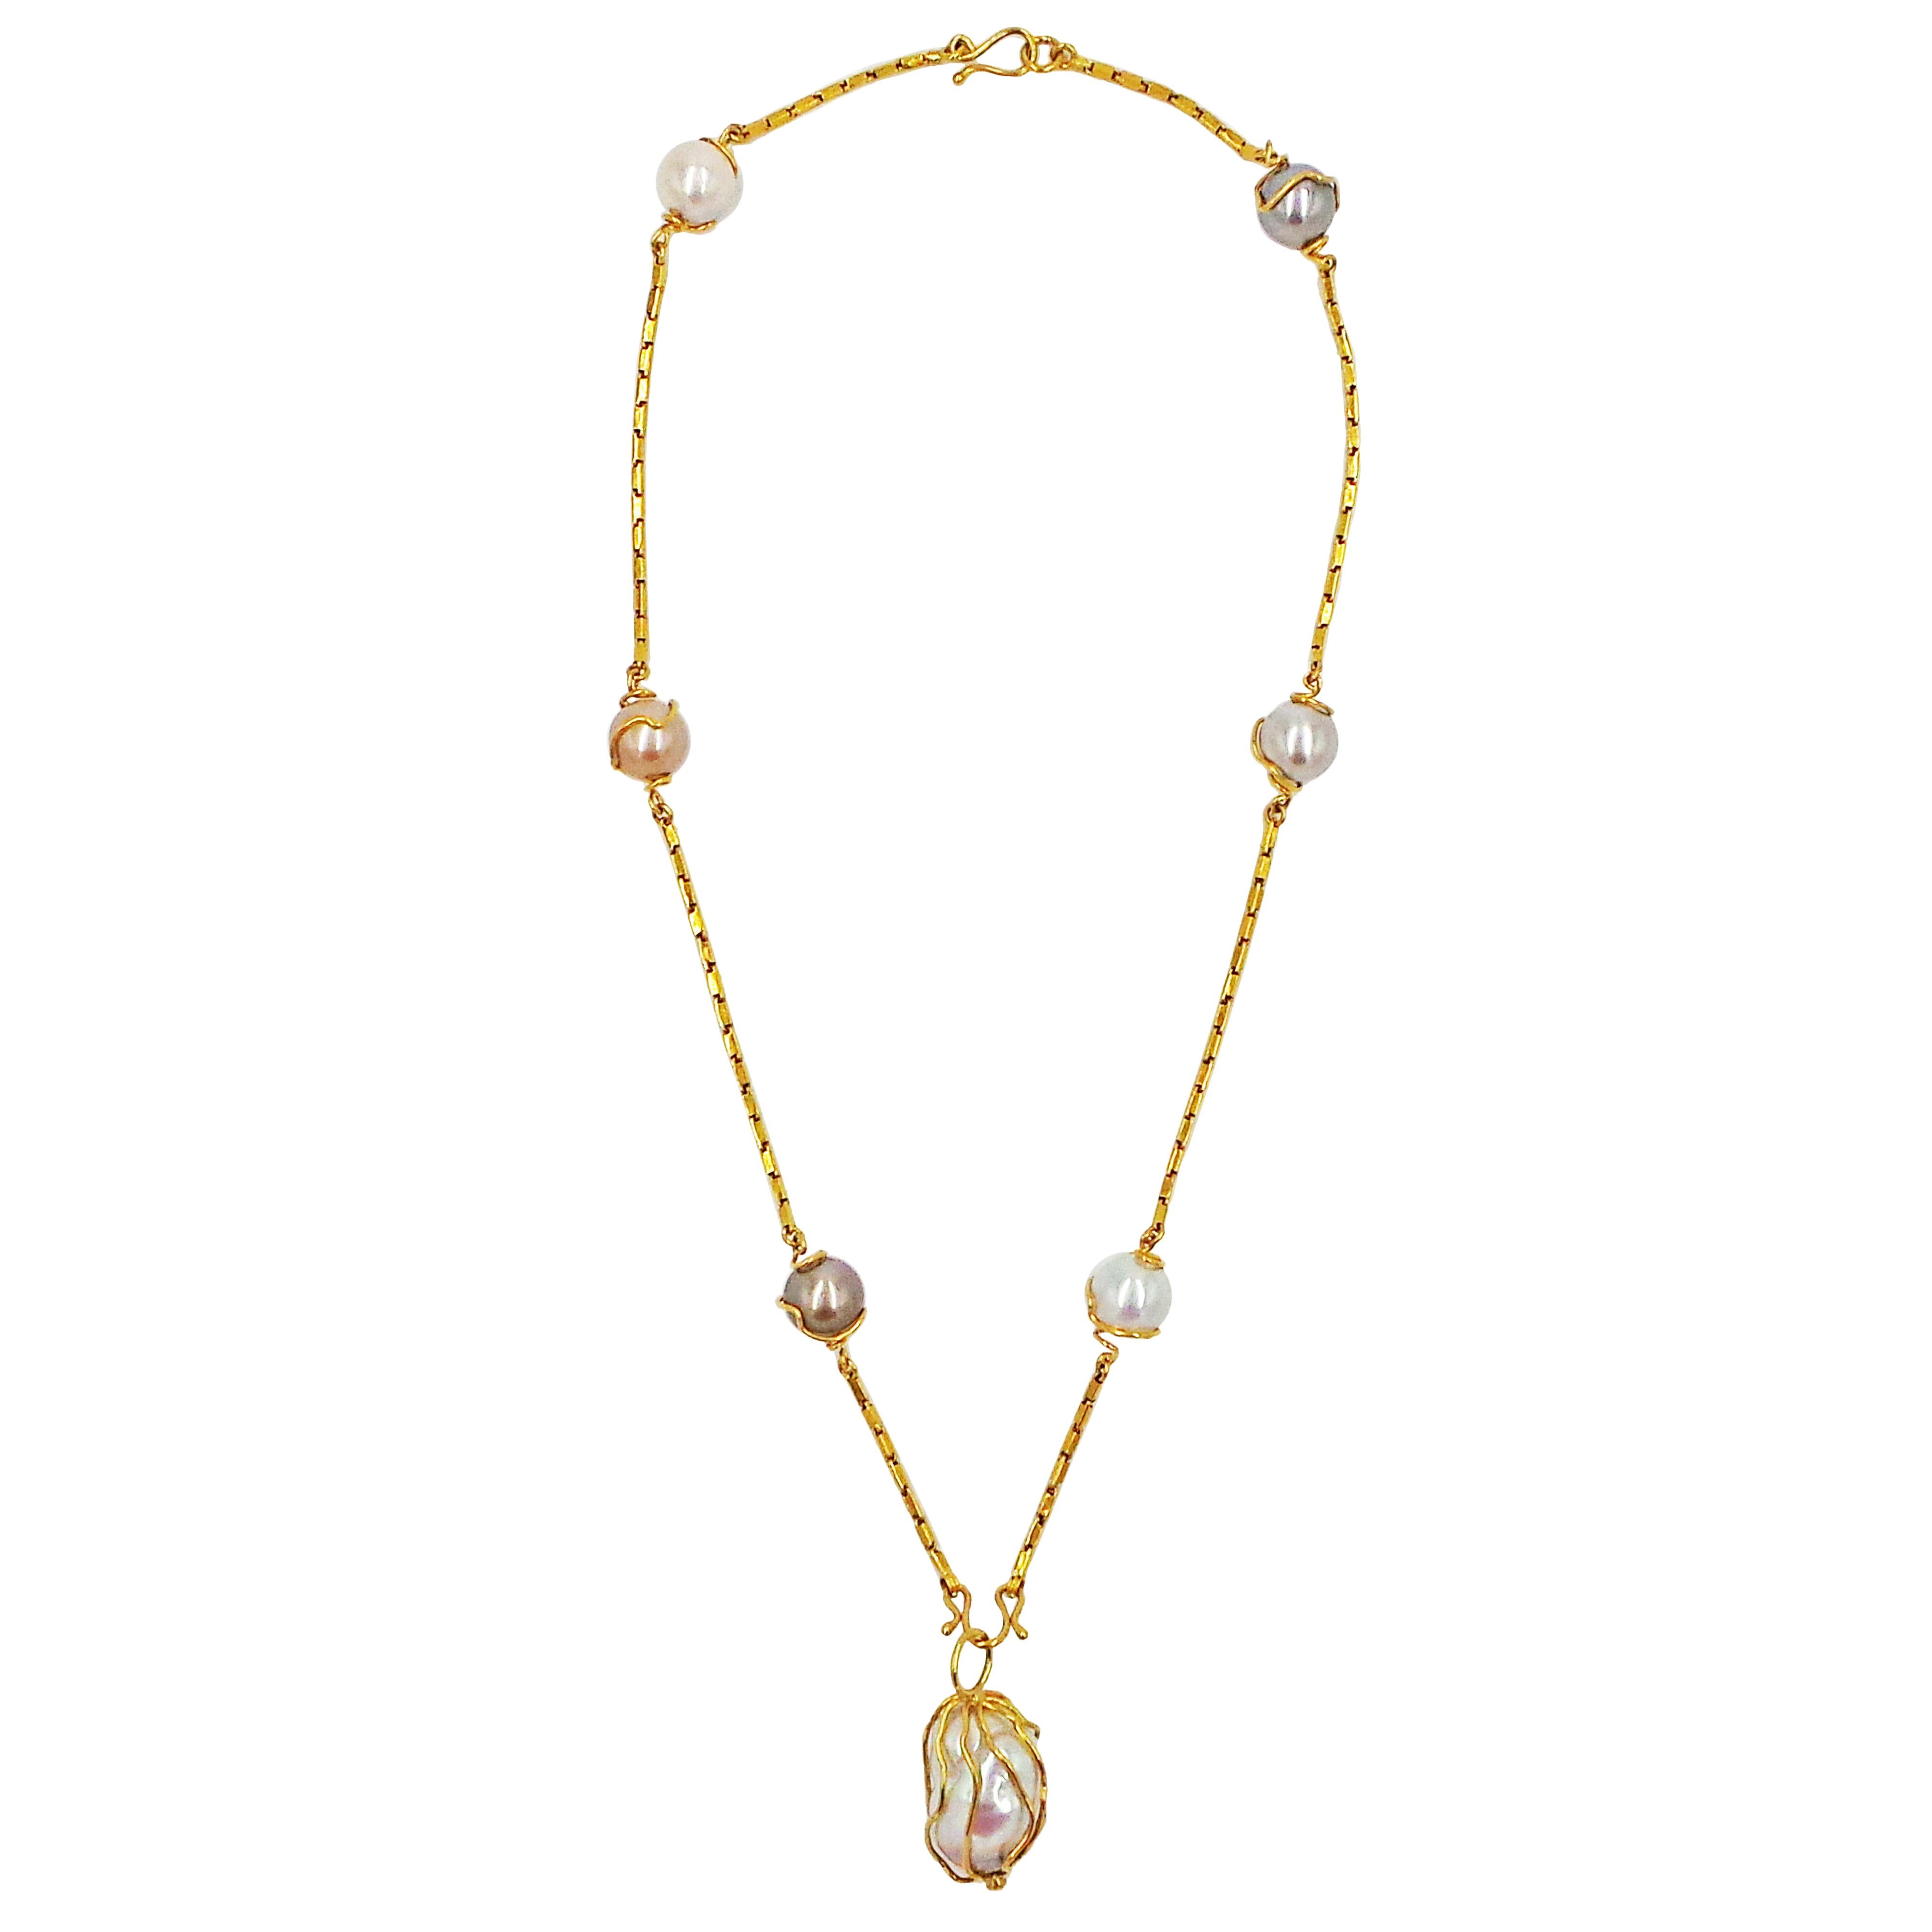 Caged 28mm Baroque Pearl 22 Karat Gold Pendant Necklace